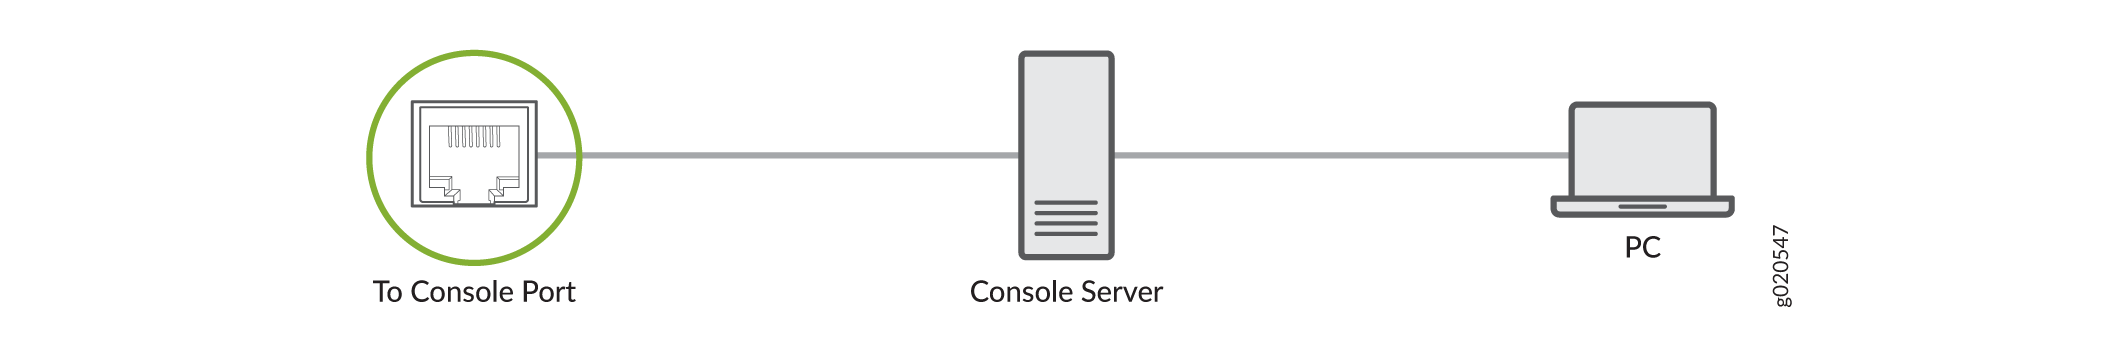 Connecting the ACX5400 Router to a Management Console Through a Console Server